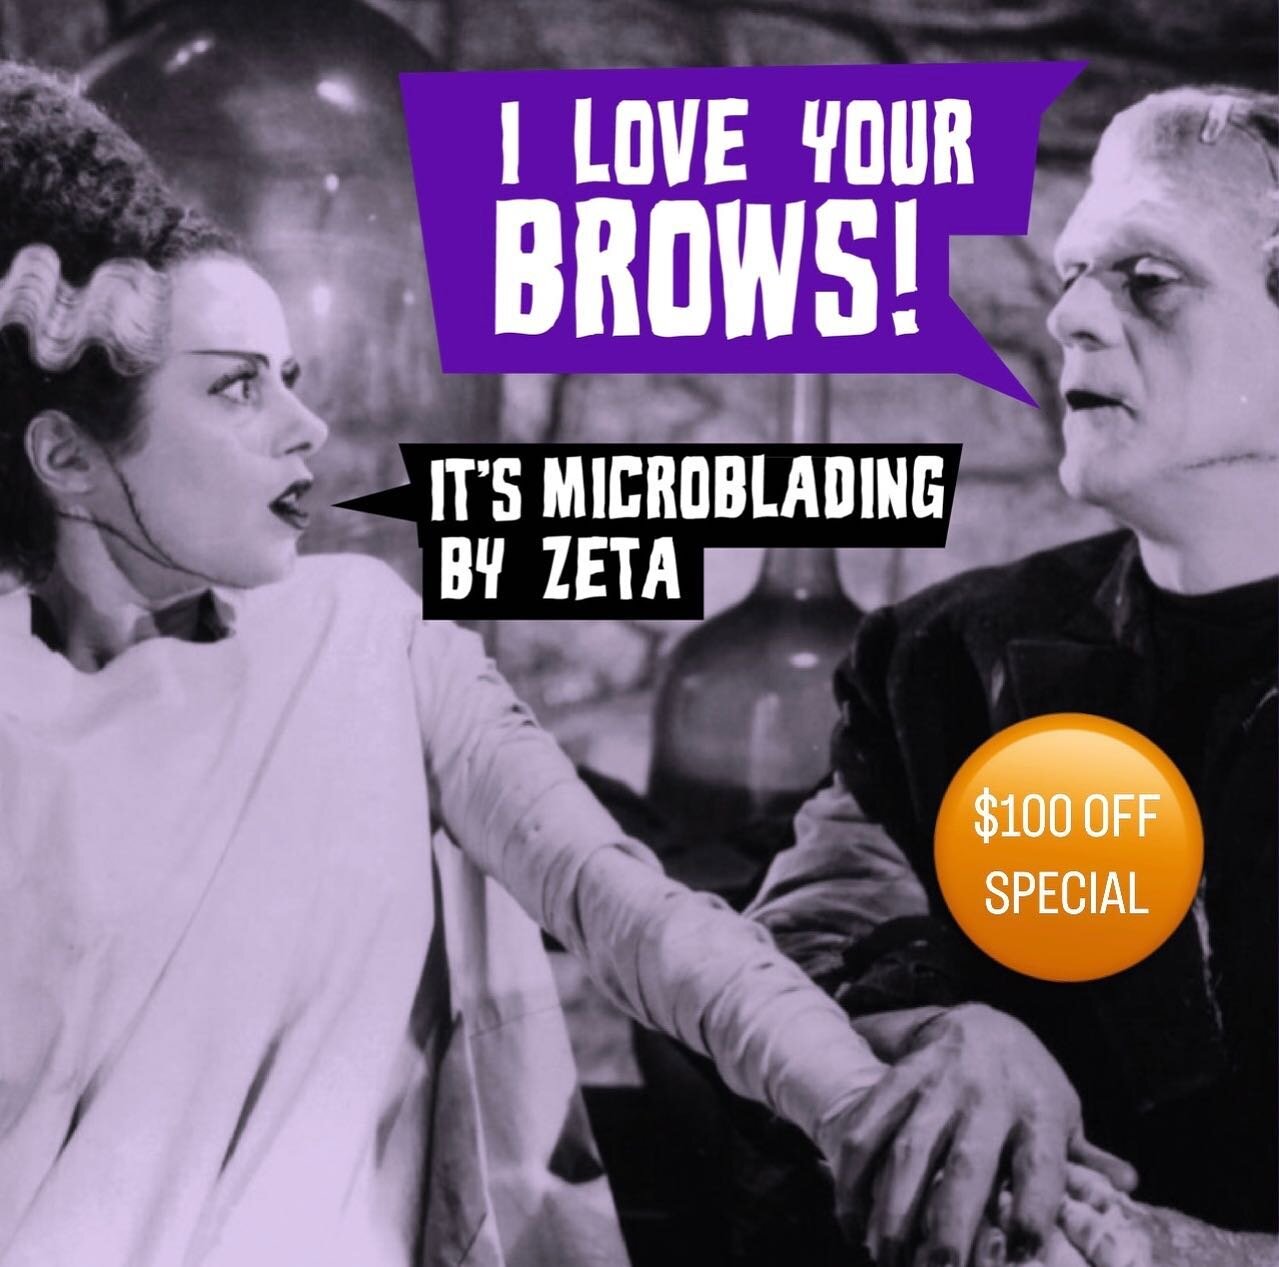 🎃Treat yourself, be brow ready for the holidays and get $100 OFF! 🕸🕷
💀From now until Oct 31st when you book your microblading appointment with me you&rsquo;ll get a discount. 
🎄This appointment can be from any date from now until Christmas. 
🔮F